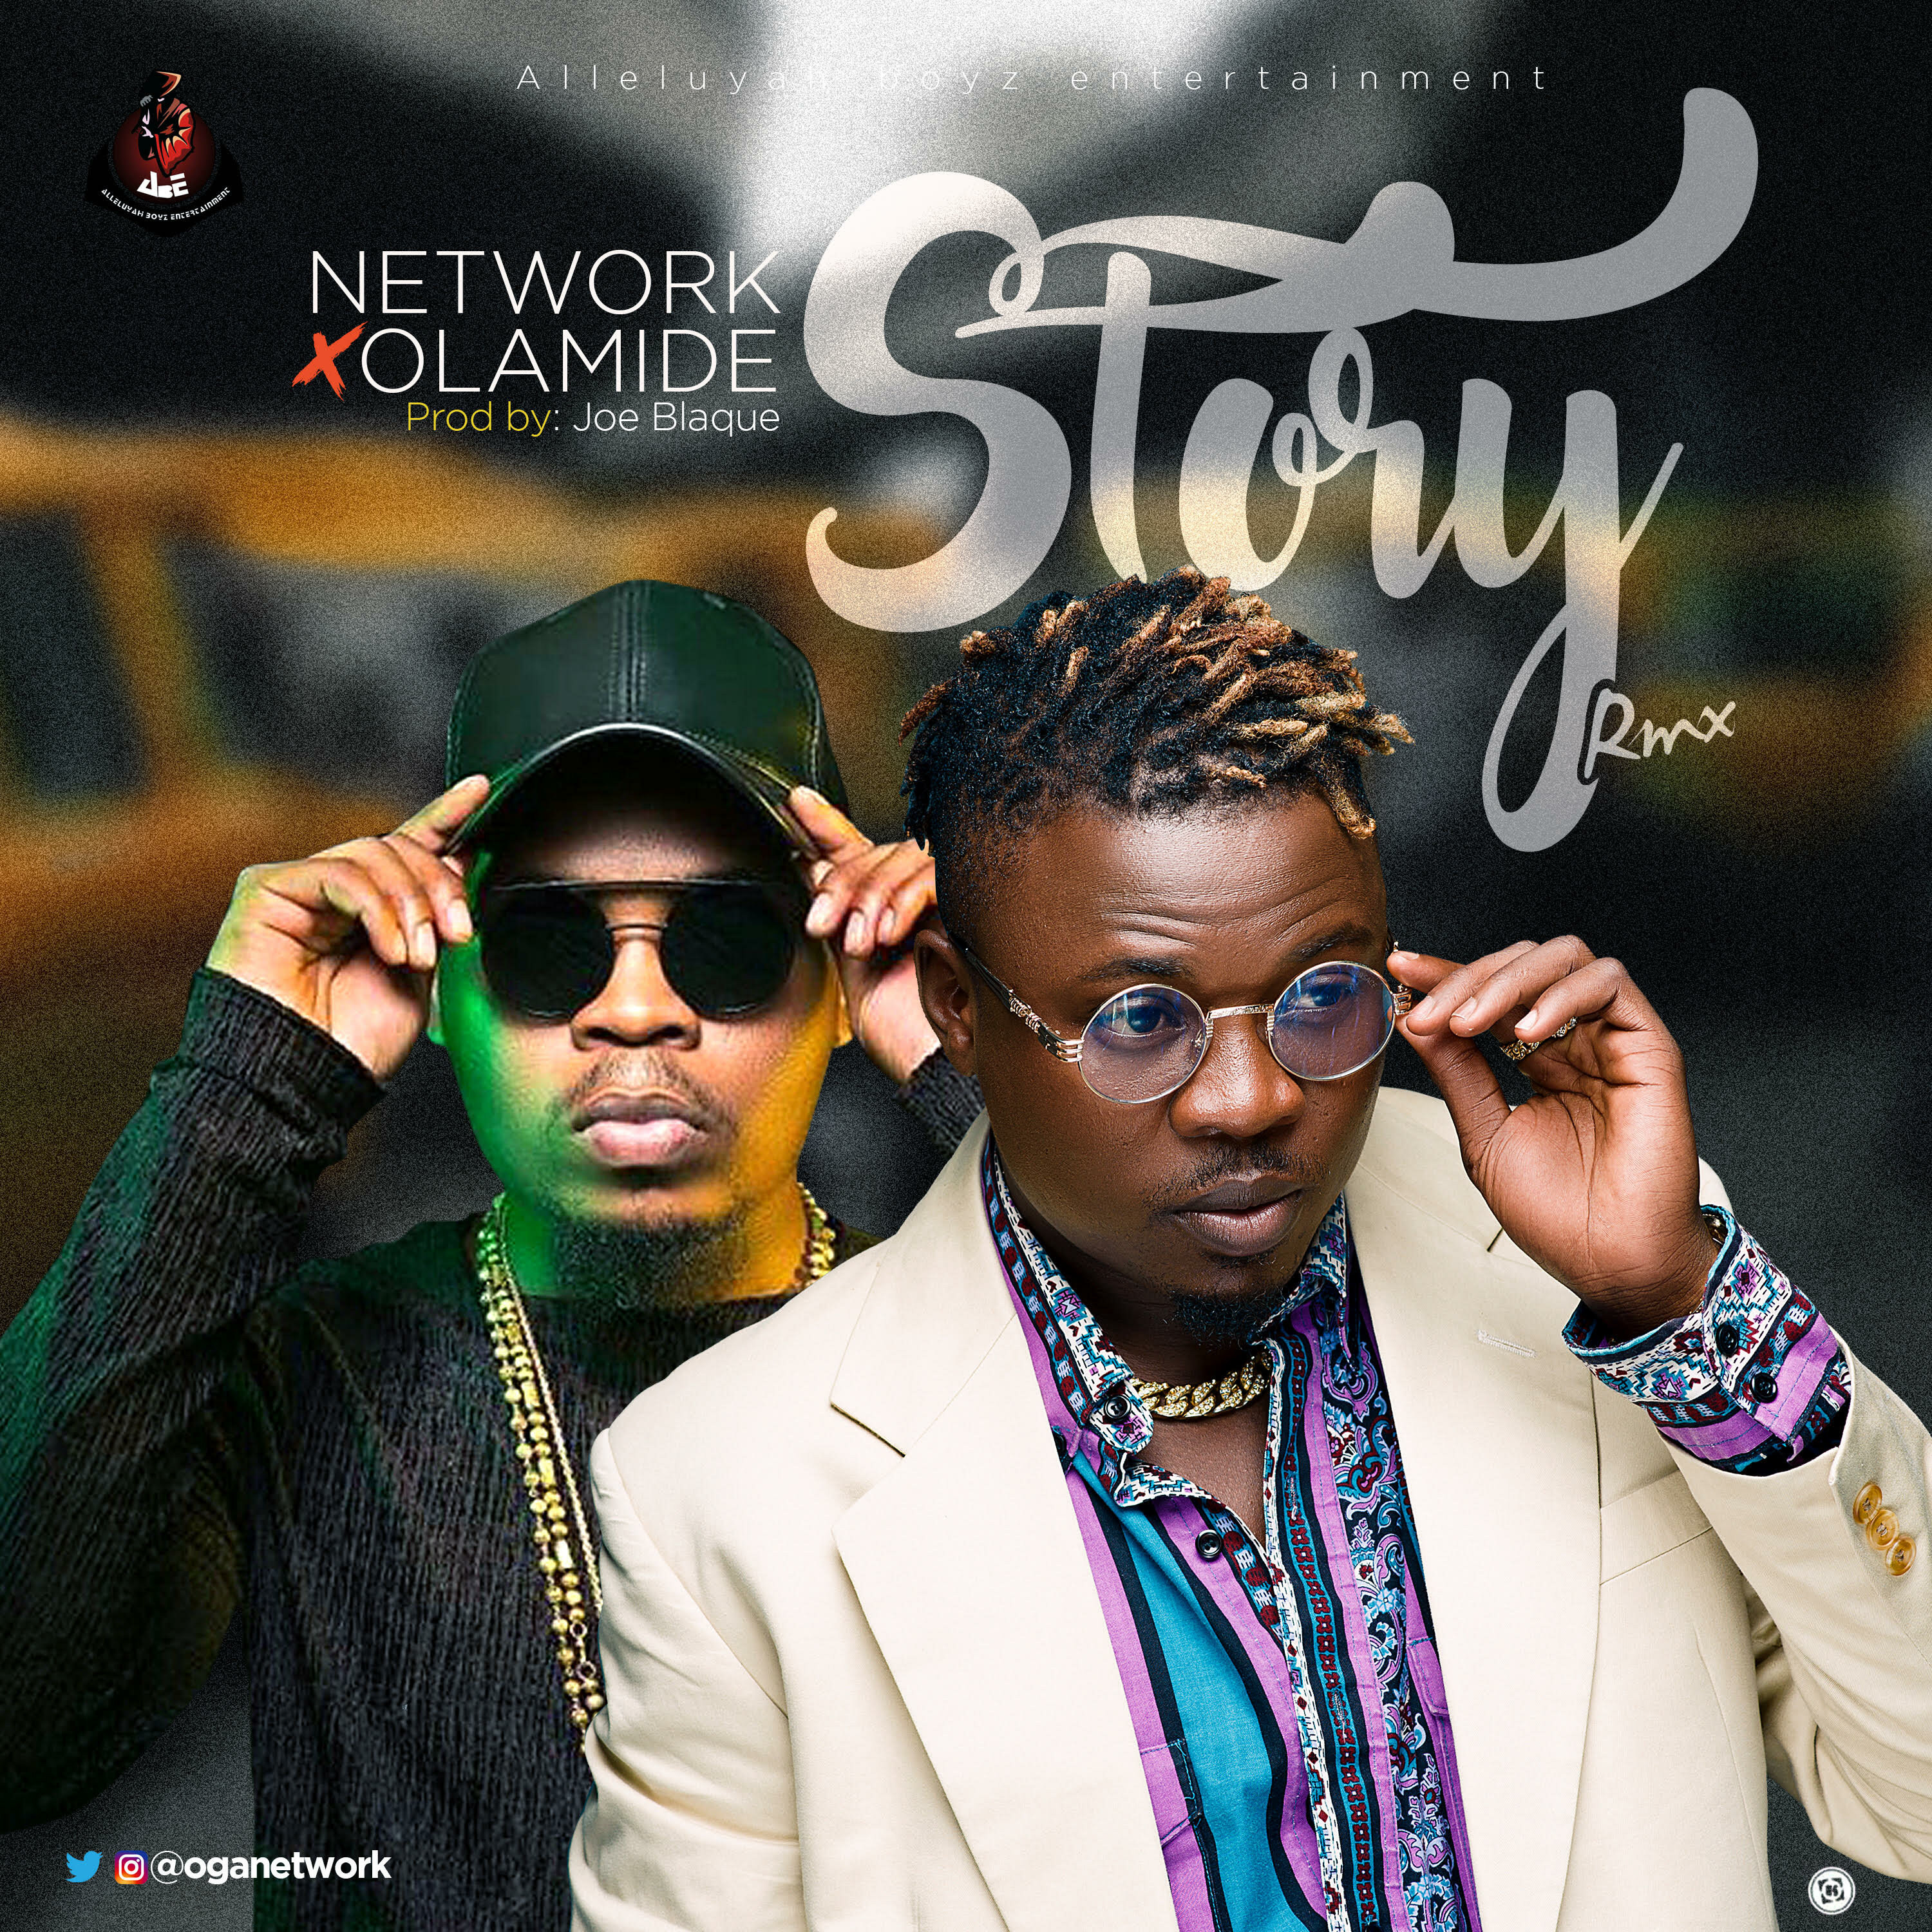 VIDEO: Network ft. Olamide – Story (Remix)